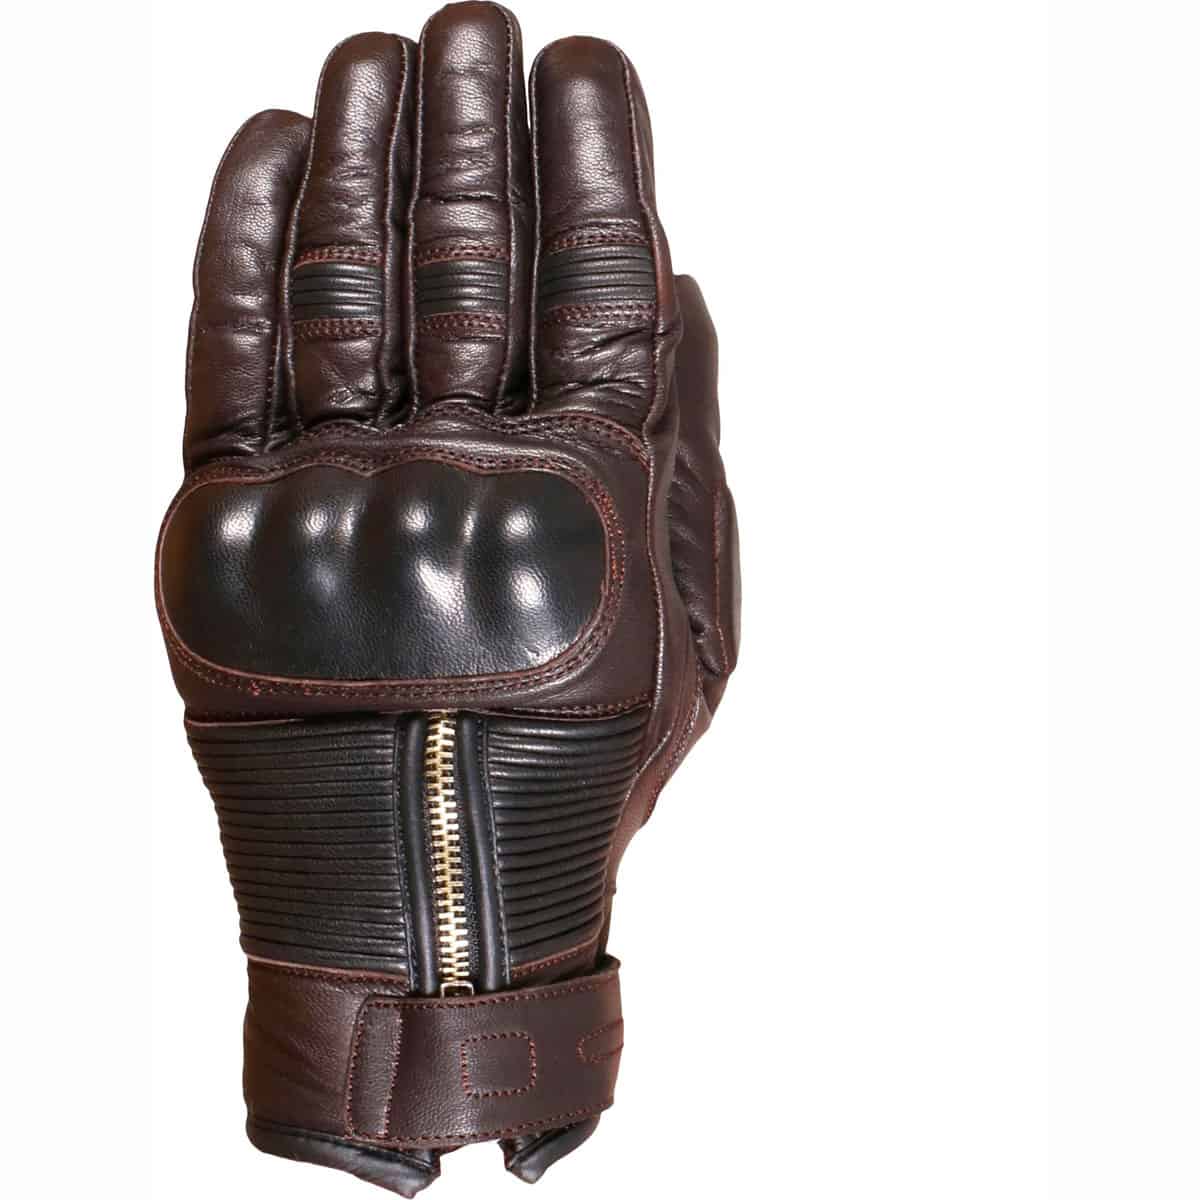 Weise Union summer leather motorcycle gloves brown 1